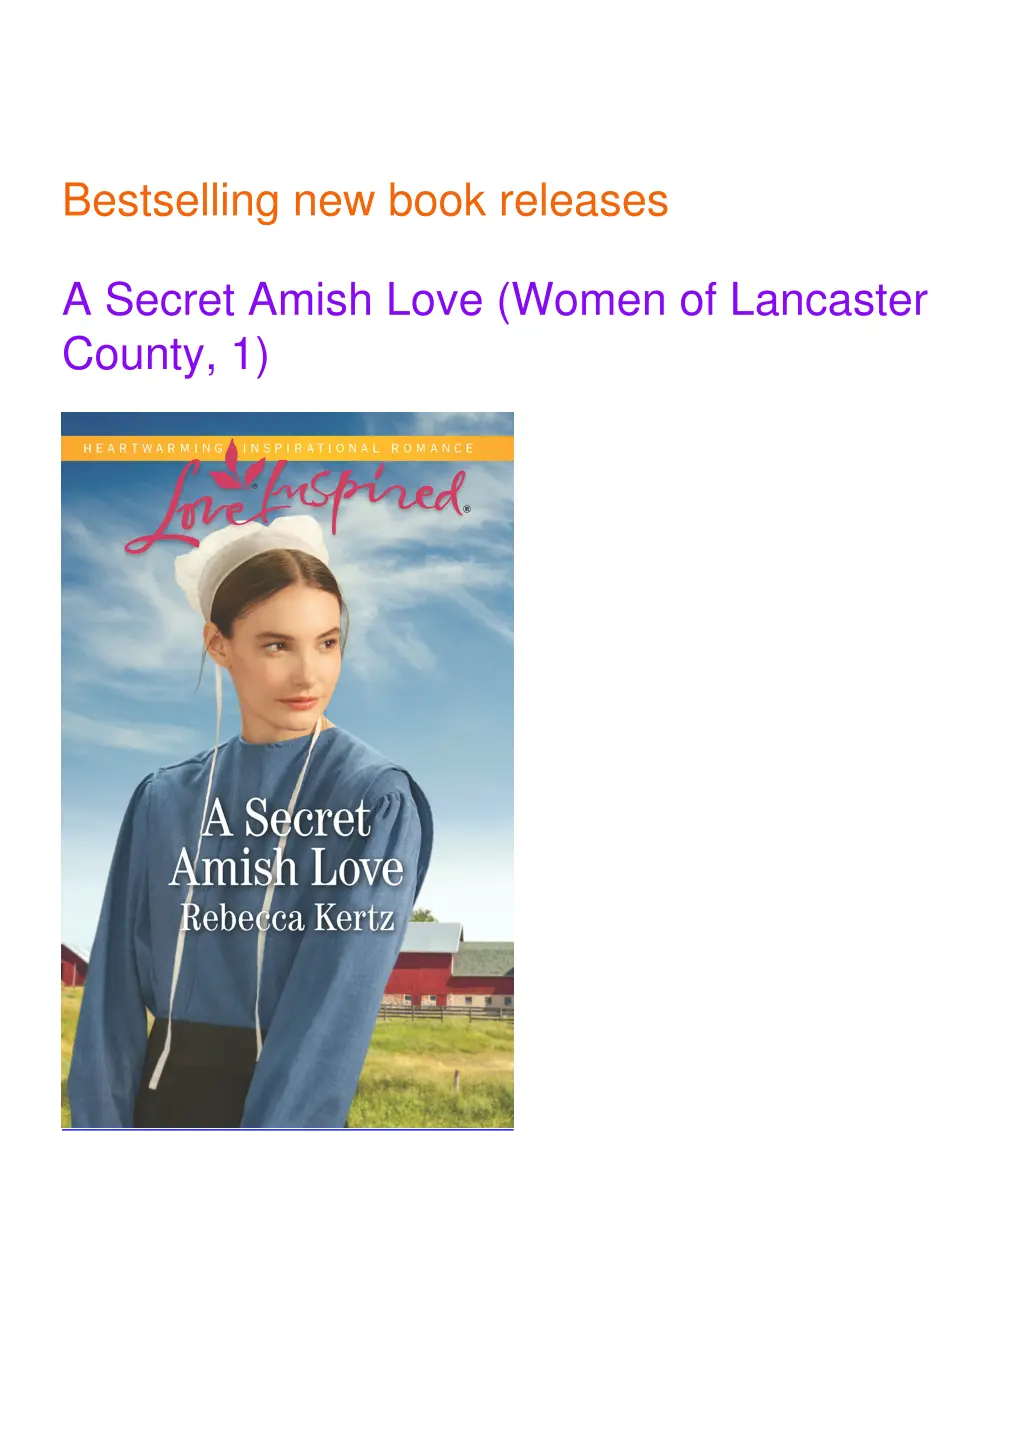 bestselling new book releases a secret amish love